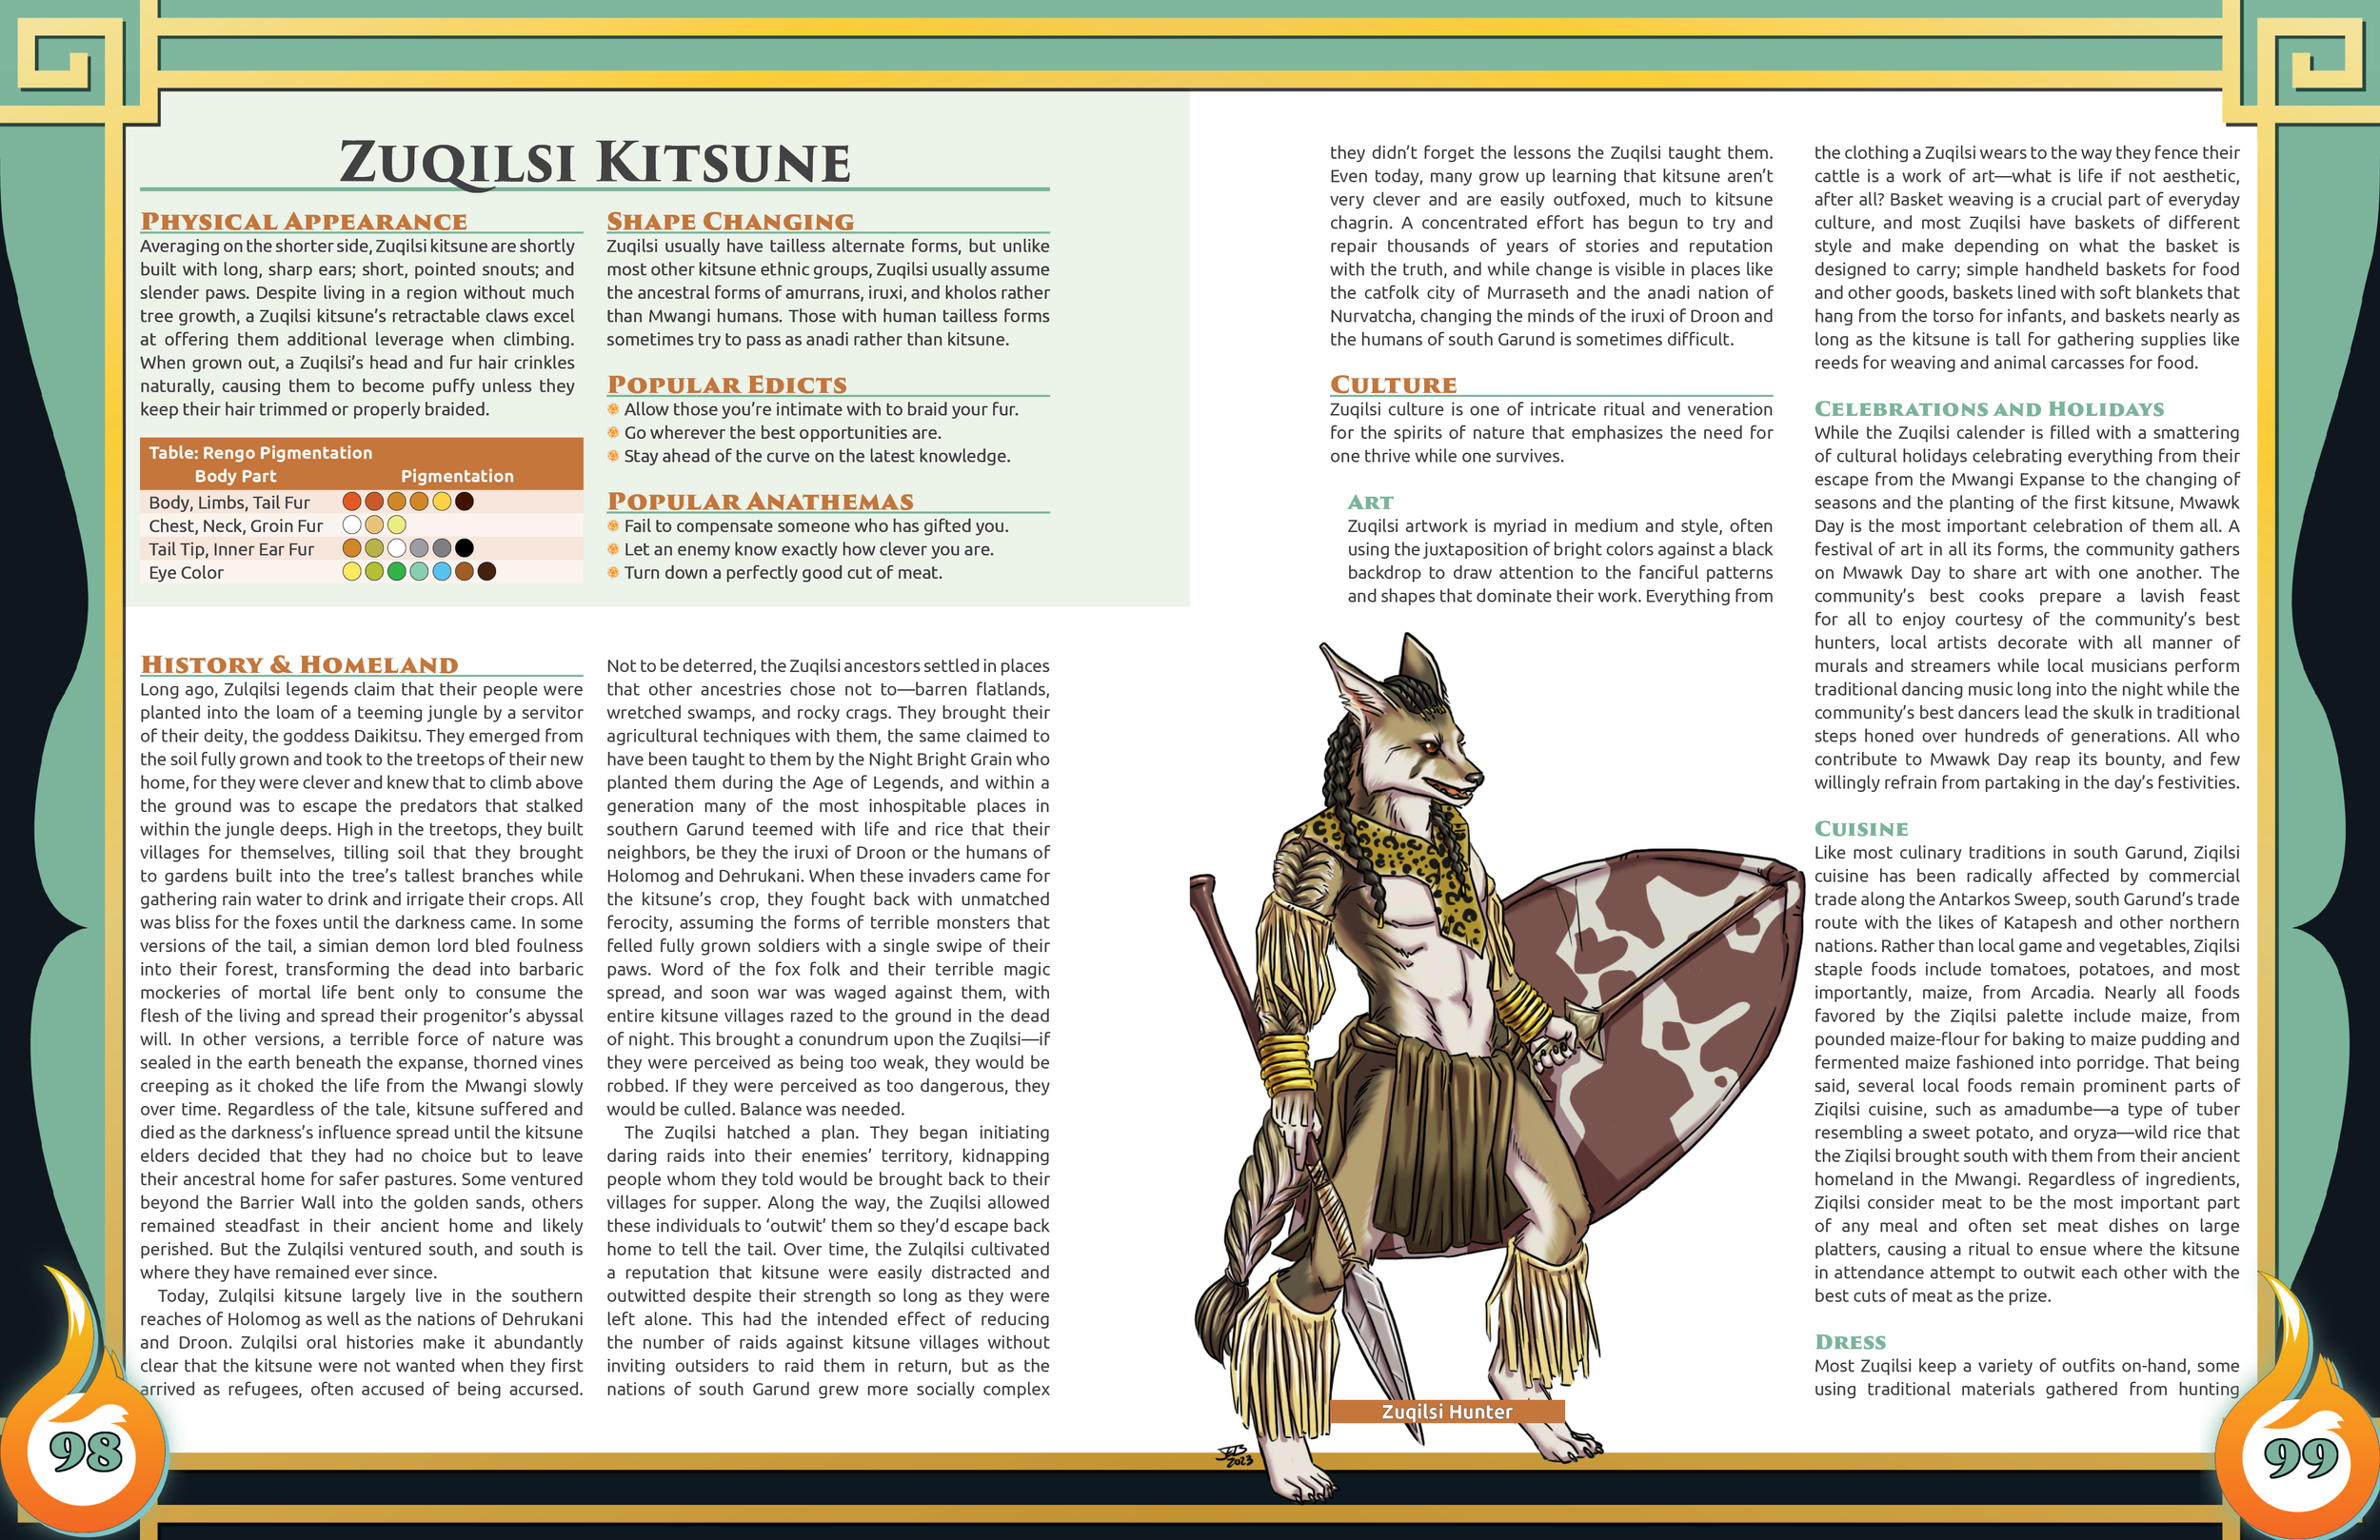 Image depicts the opening information about the new Zuqilsi ethnic group, including the book's new pigmentation charts. Also depicted on the page is a Zuqilsi kitsune hunter, his hair and fur traditionally braded back and along his arms and tail.